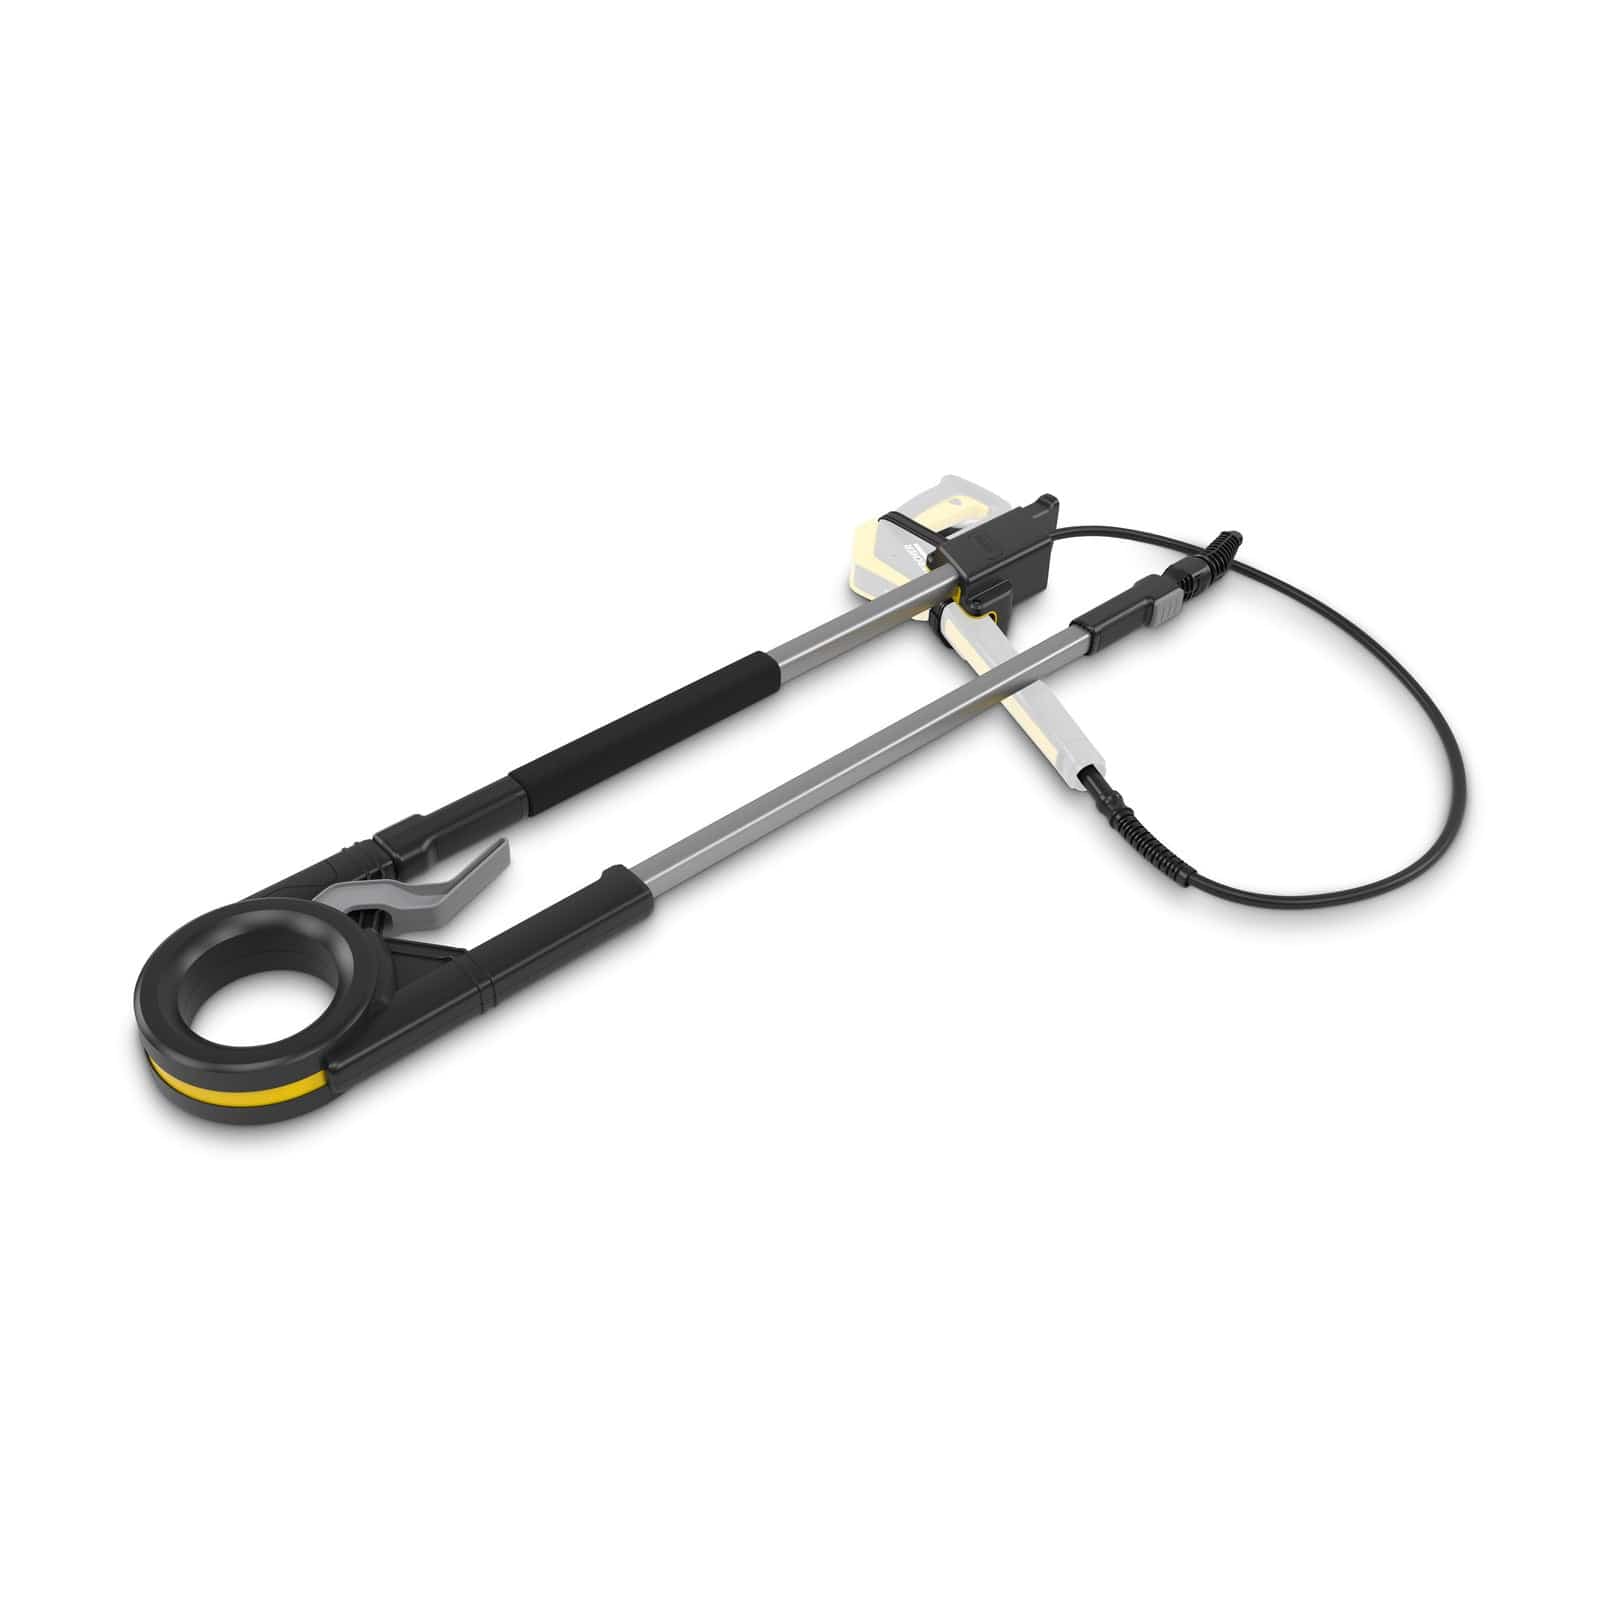 Karcher Multi-functional Spray Gun with 3 Spraying Patterns | Supply Master | Accra, Ghana Cleaning Equipment Accessories Buy Tools hardware Building materials